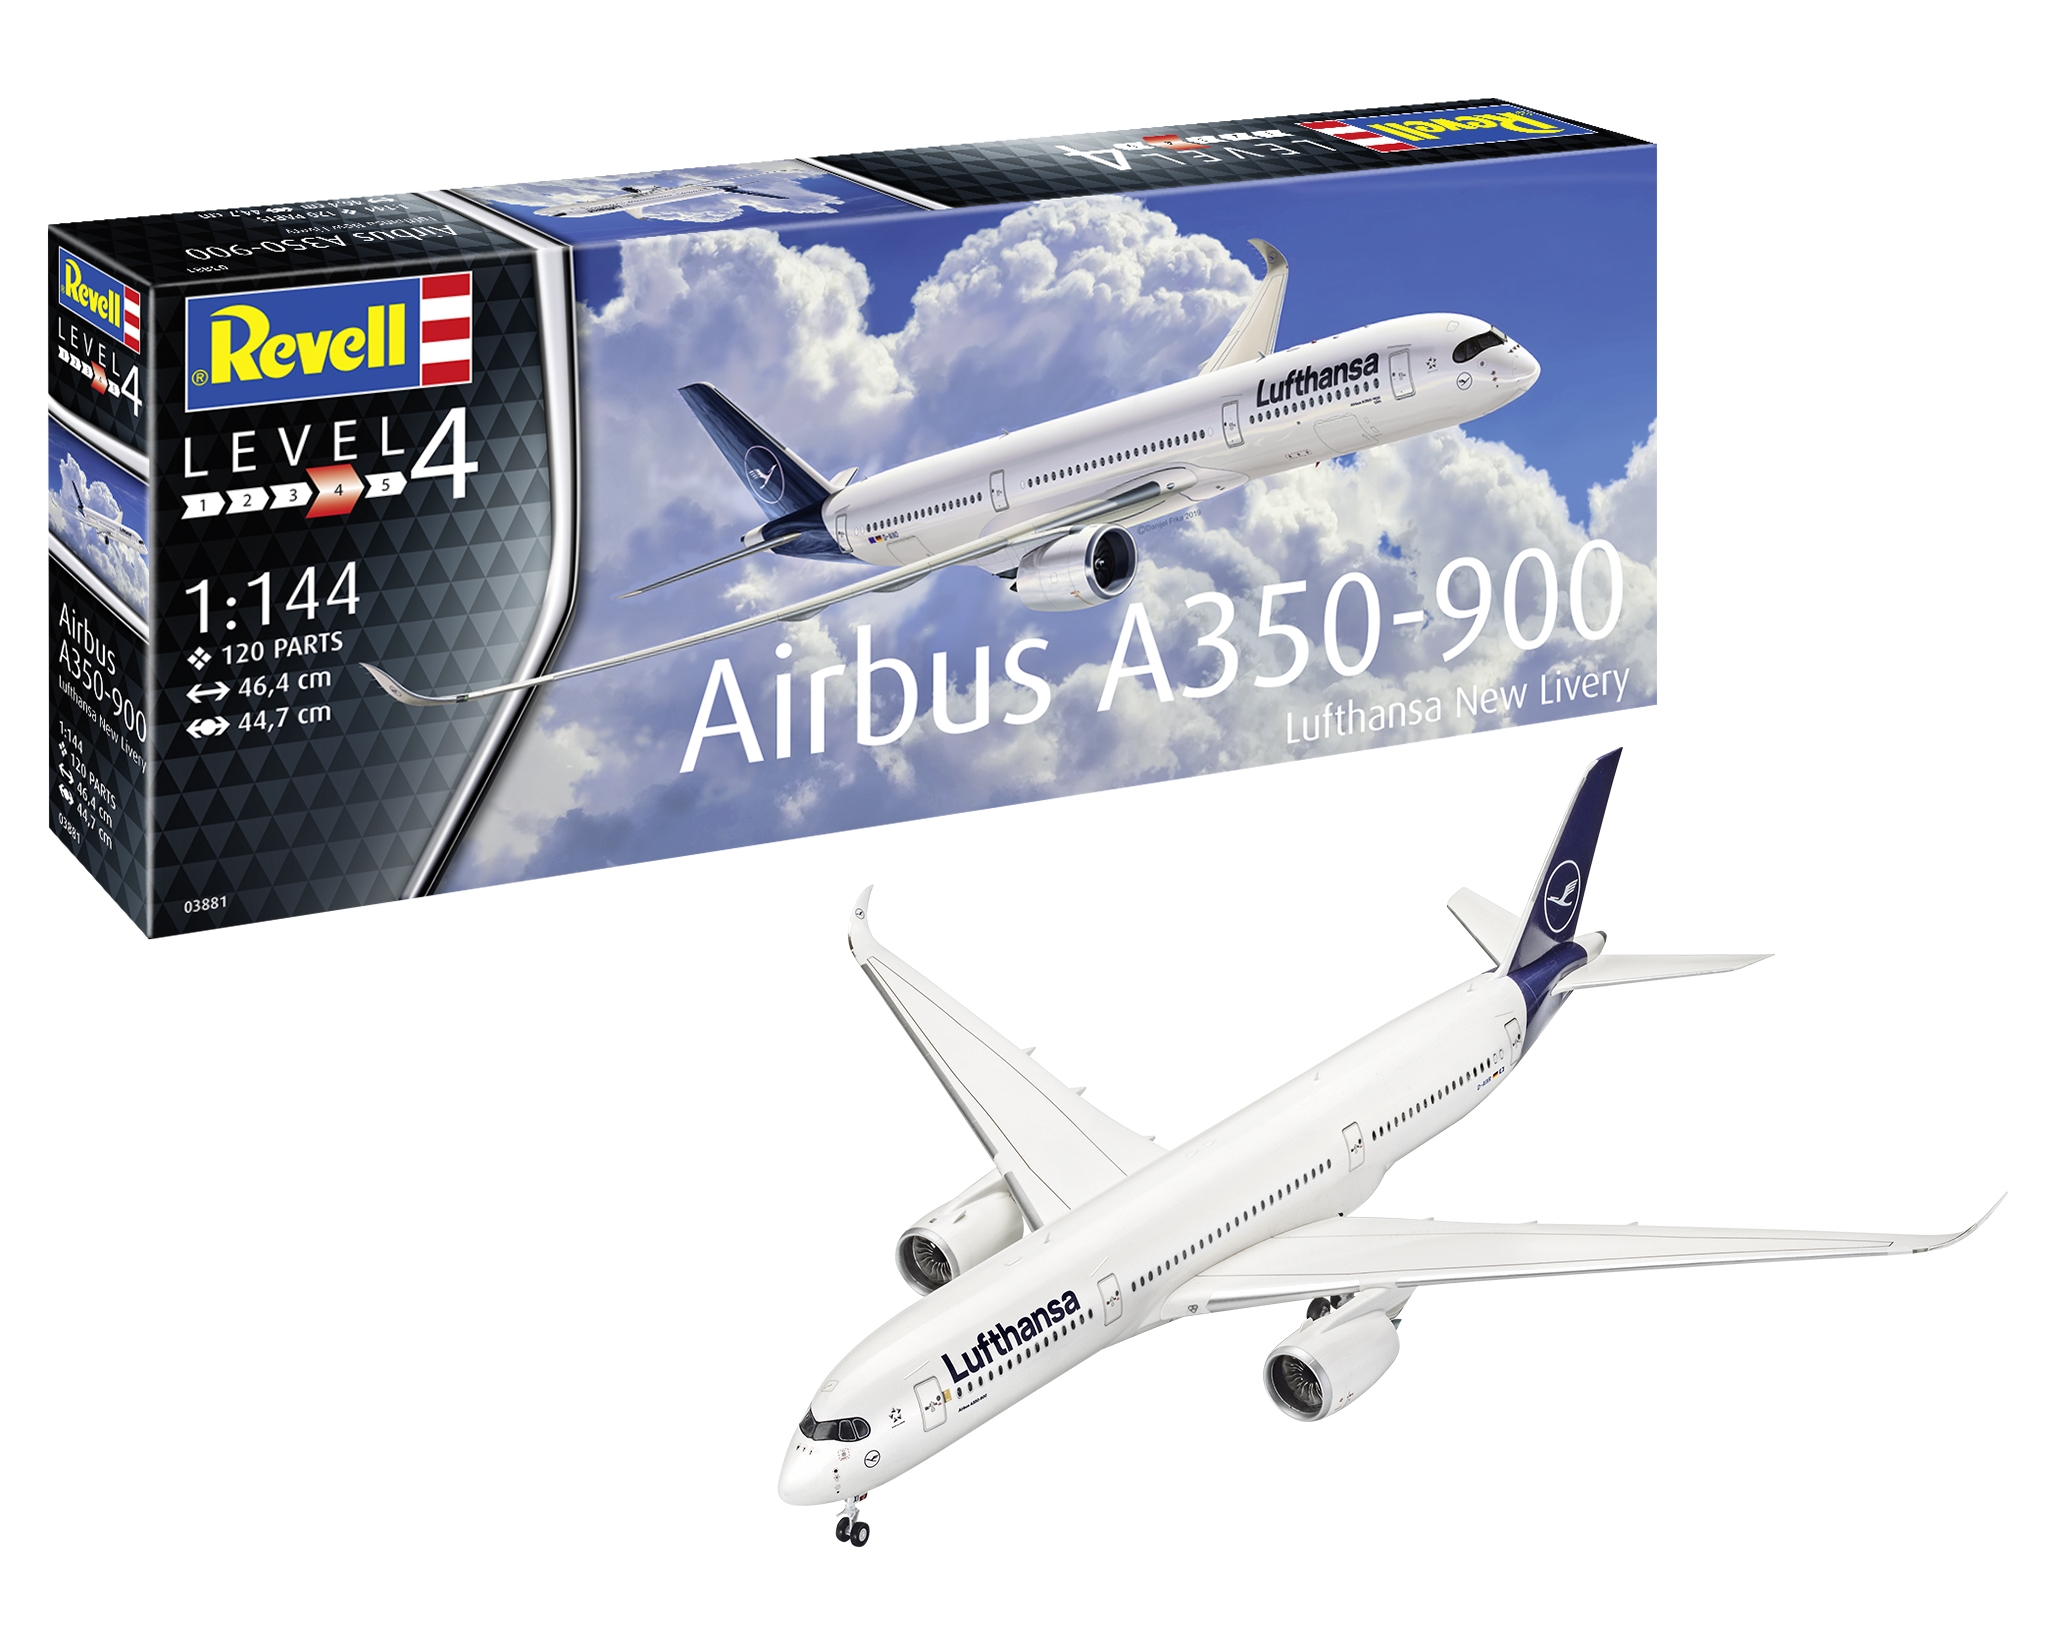 Revell 3881 - AIRBUS A350-900 LUFTHANSA NEW